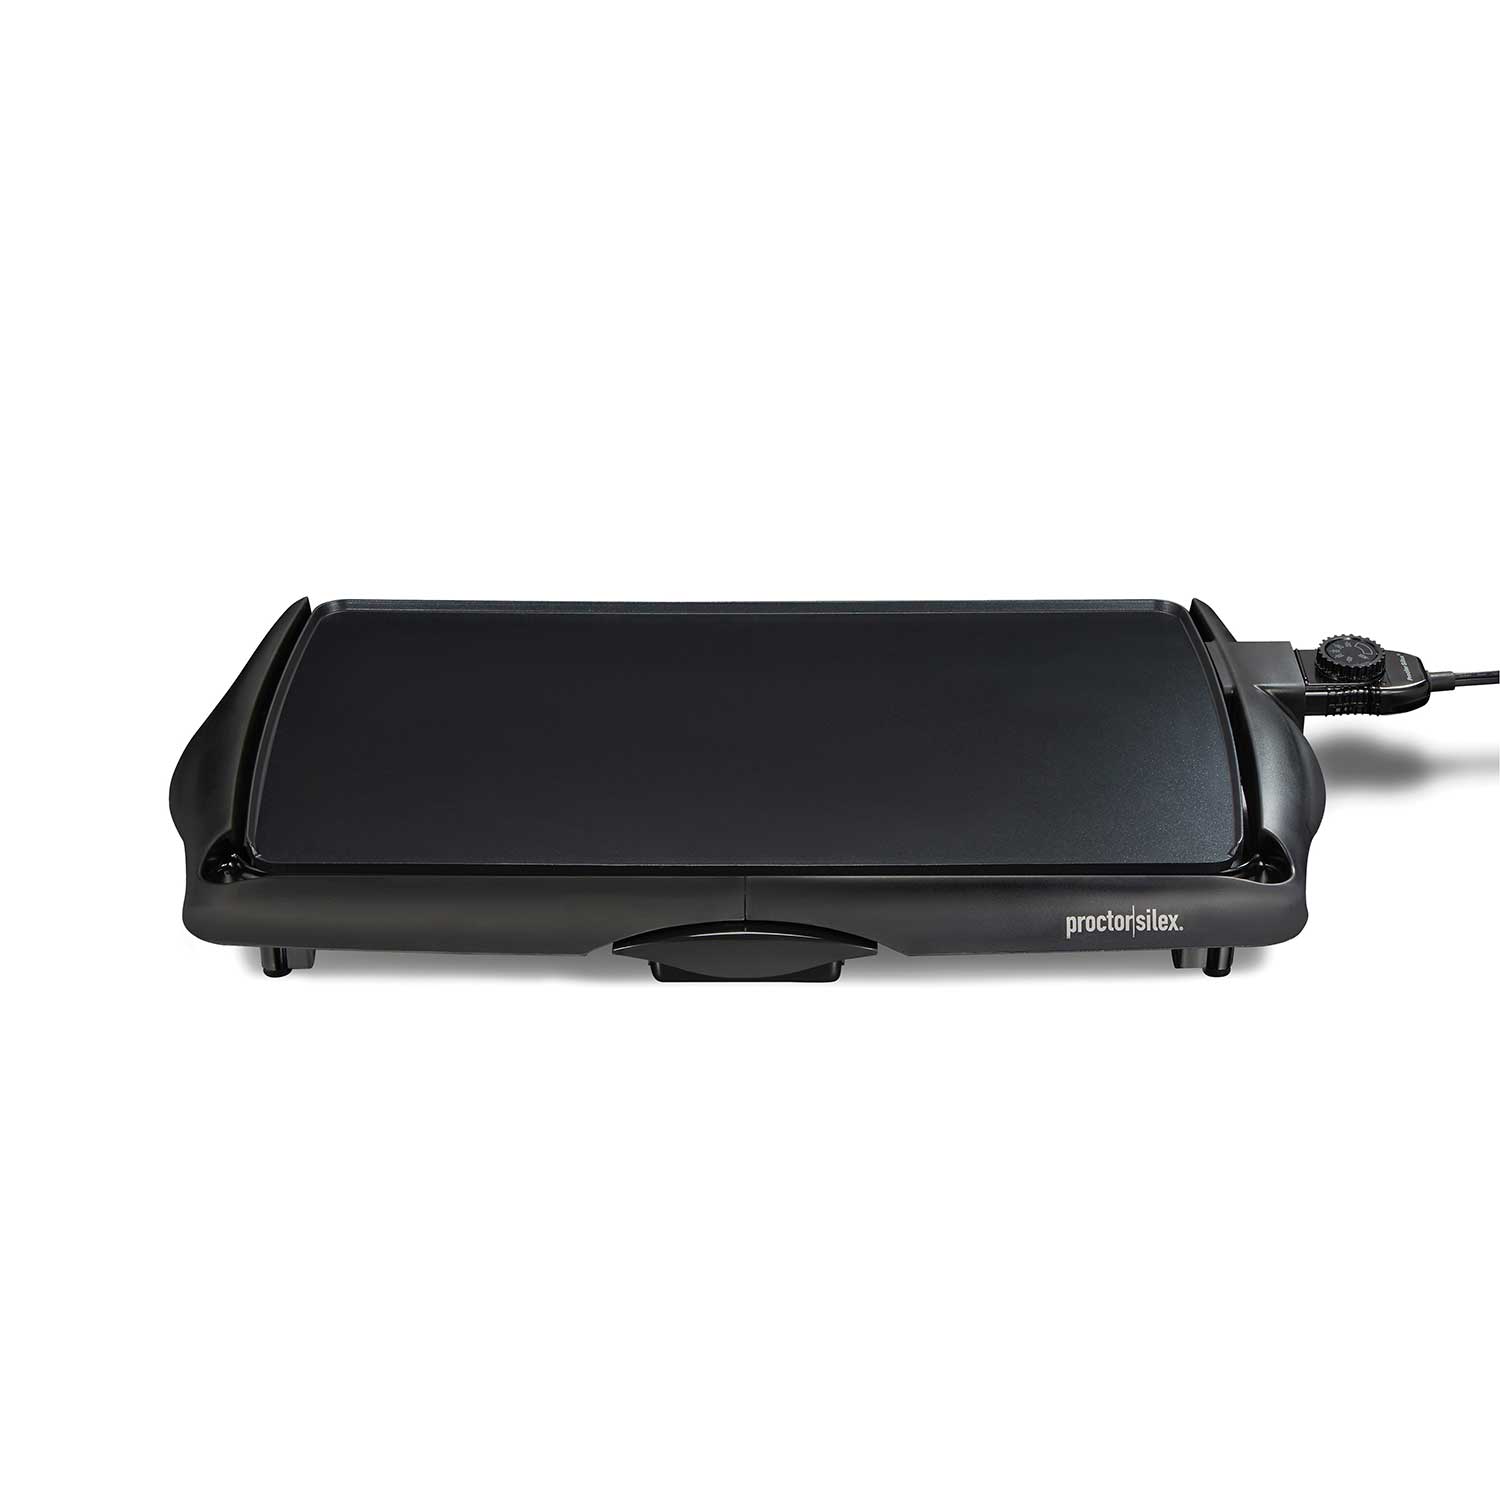 Proctor Silex Durable Electric Griddle, Nonstick, Family Size